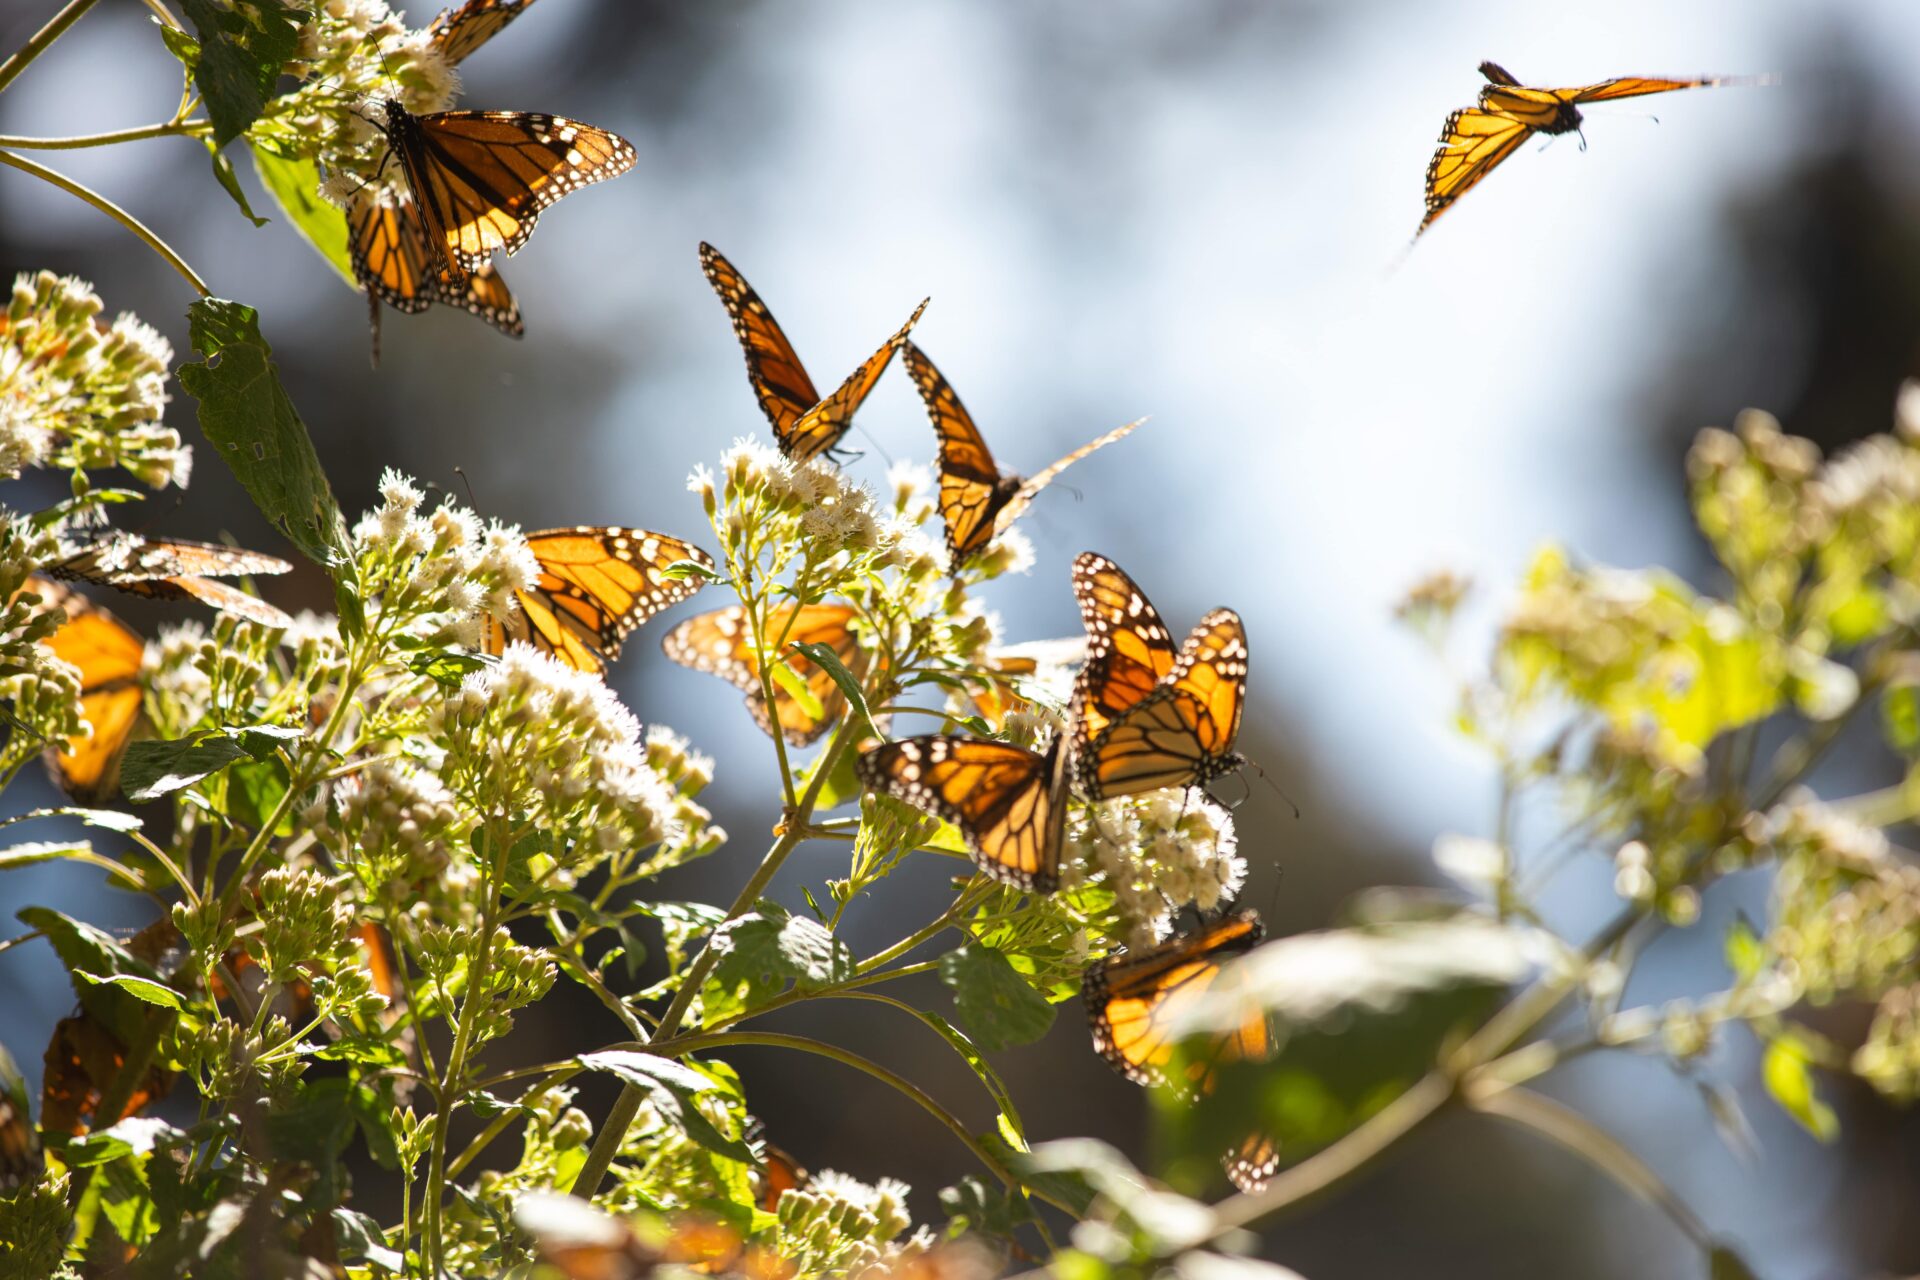 Monarch butterflies flying around oyamel fir branches in the sunshine.